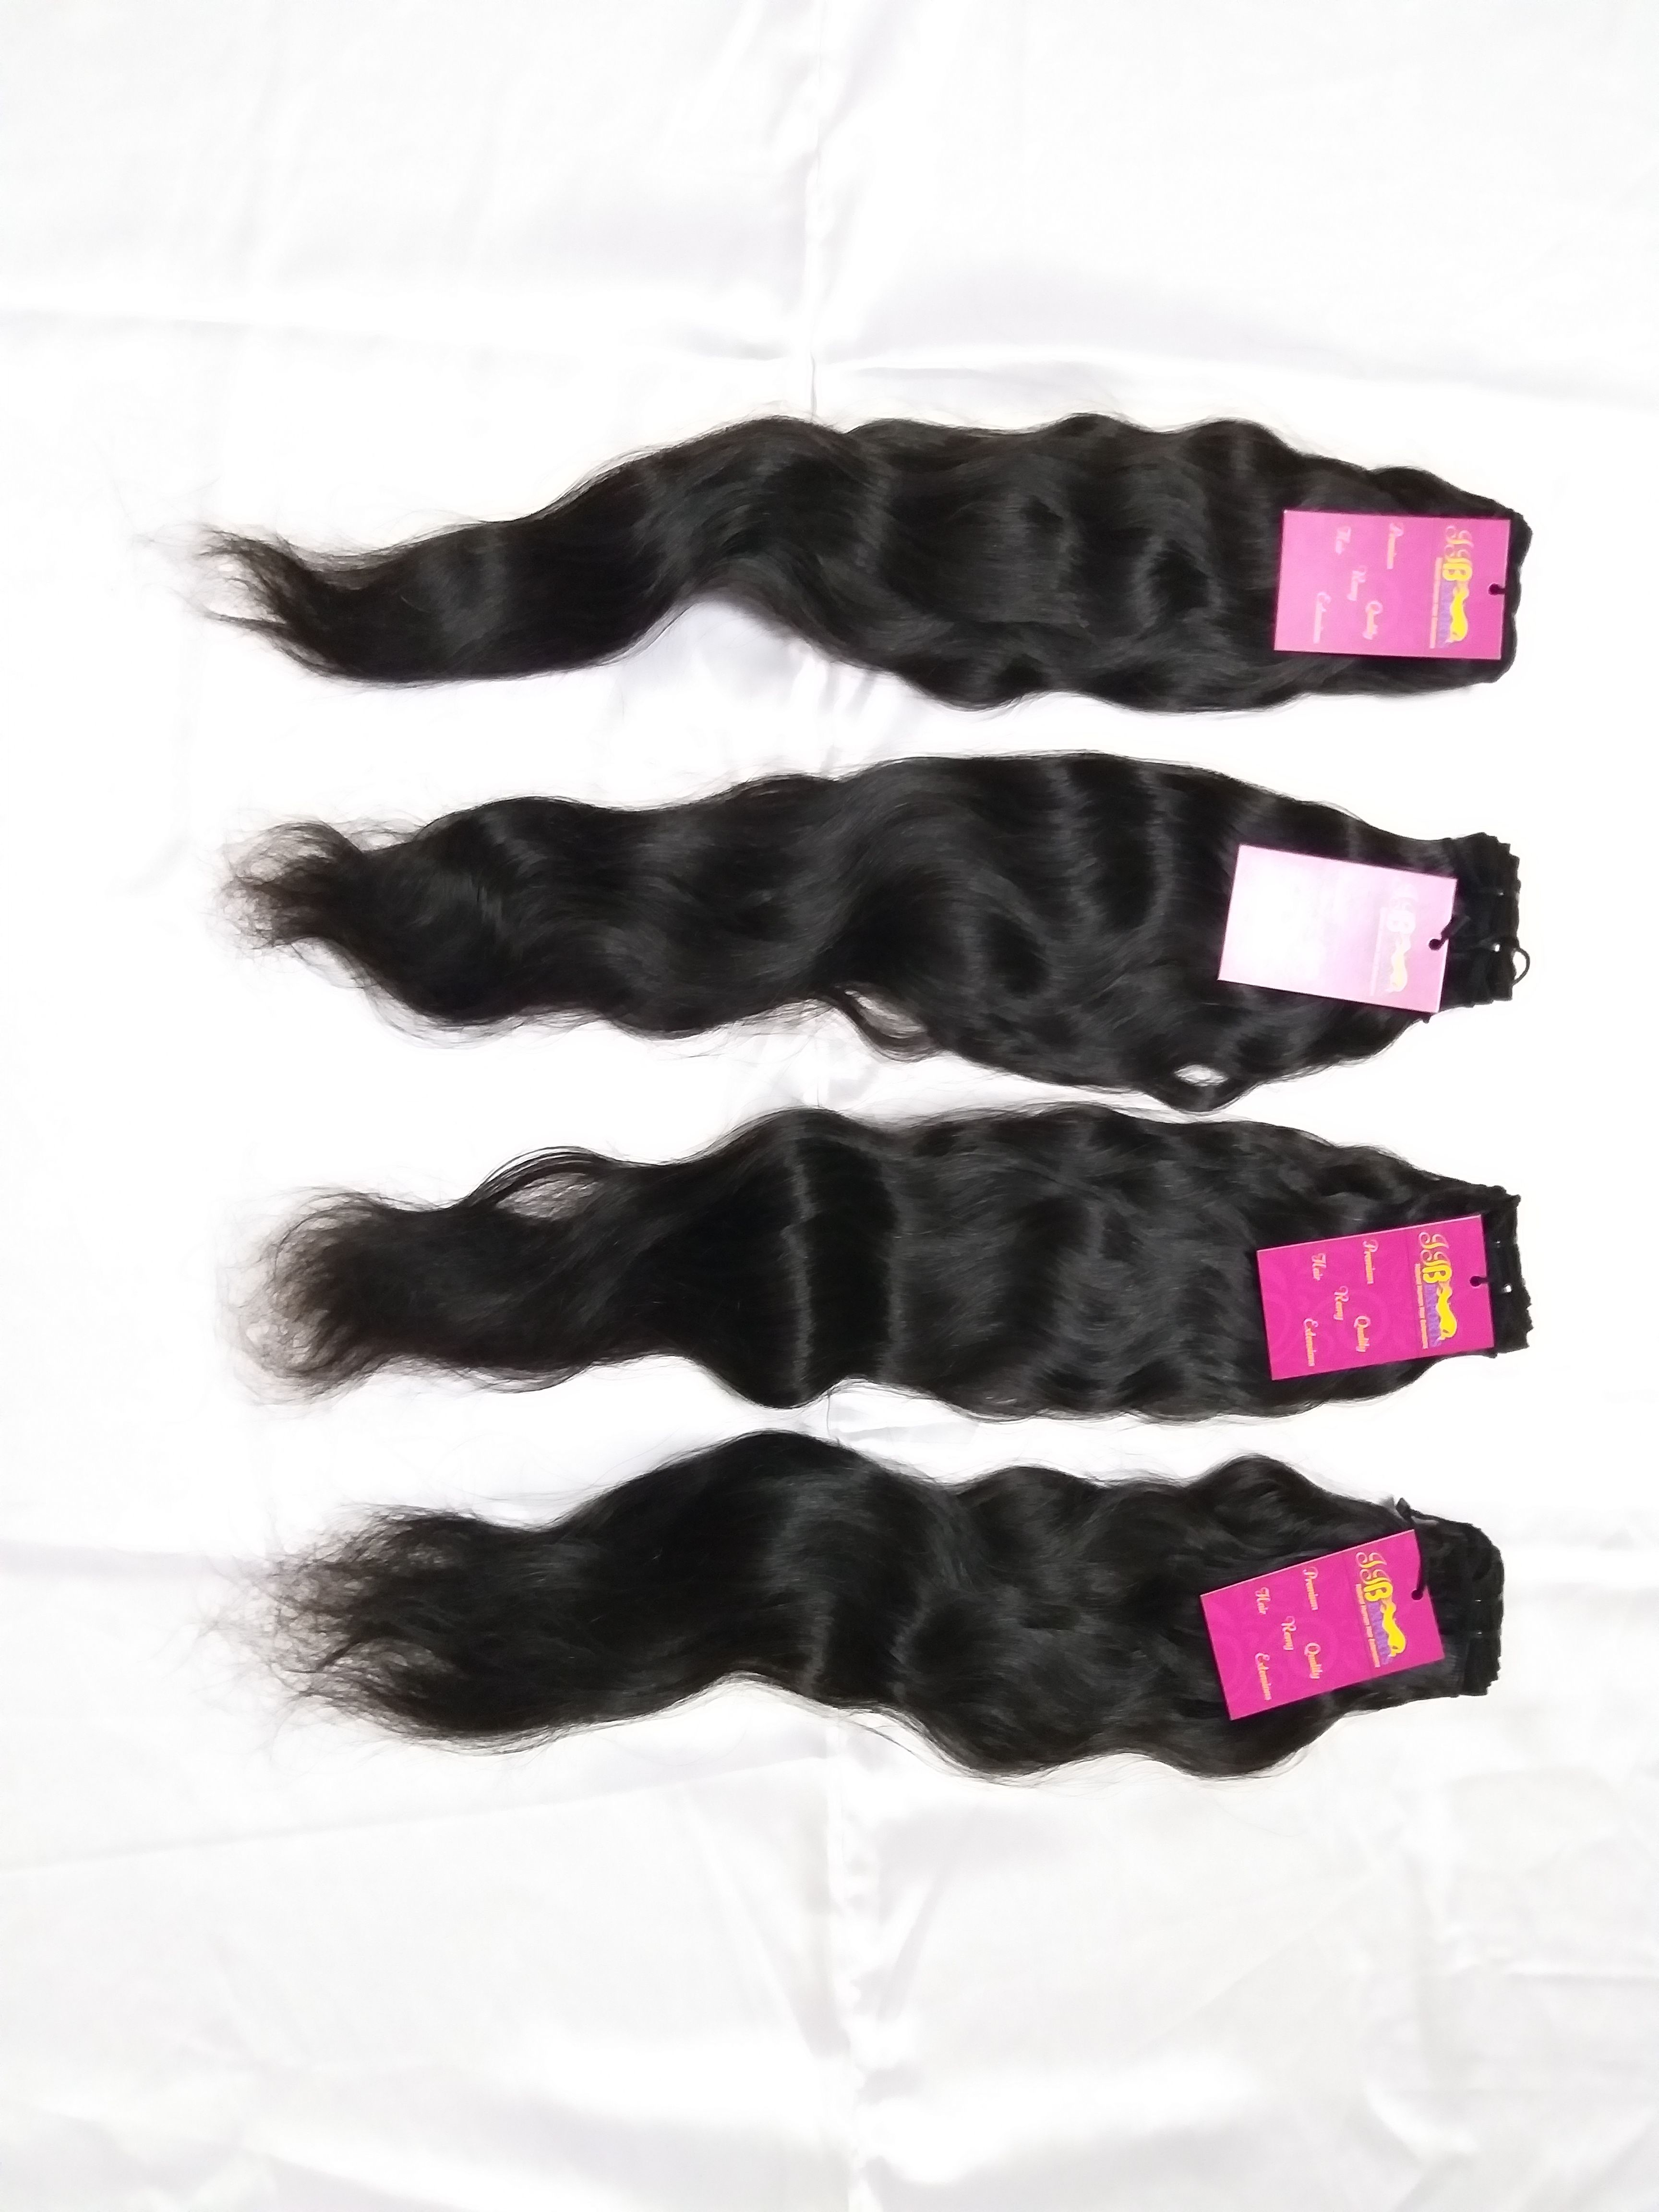 Single Donor Raw Unprocessed Virgin Remy Brazilian 10a 11a Grade Indian Wave Human Hair